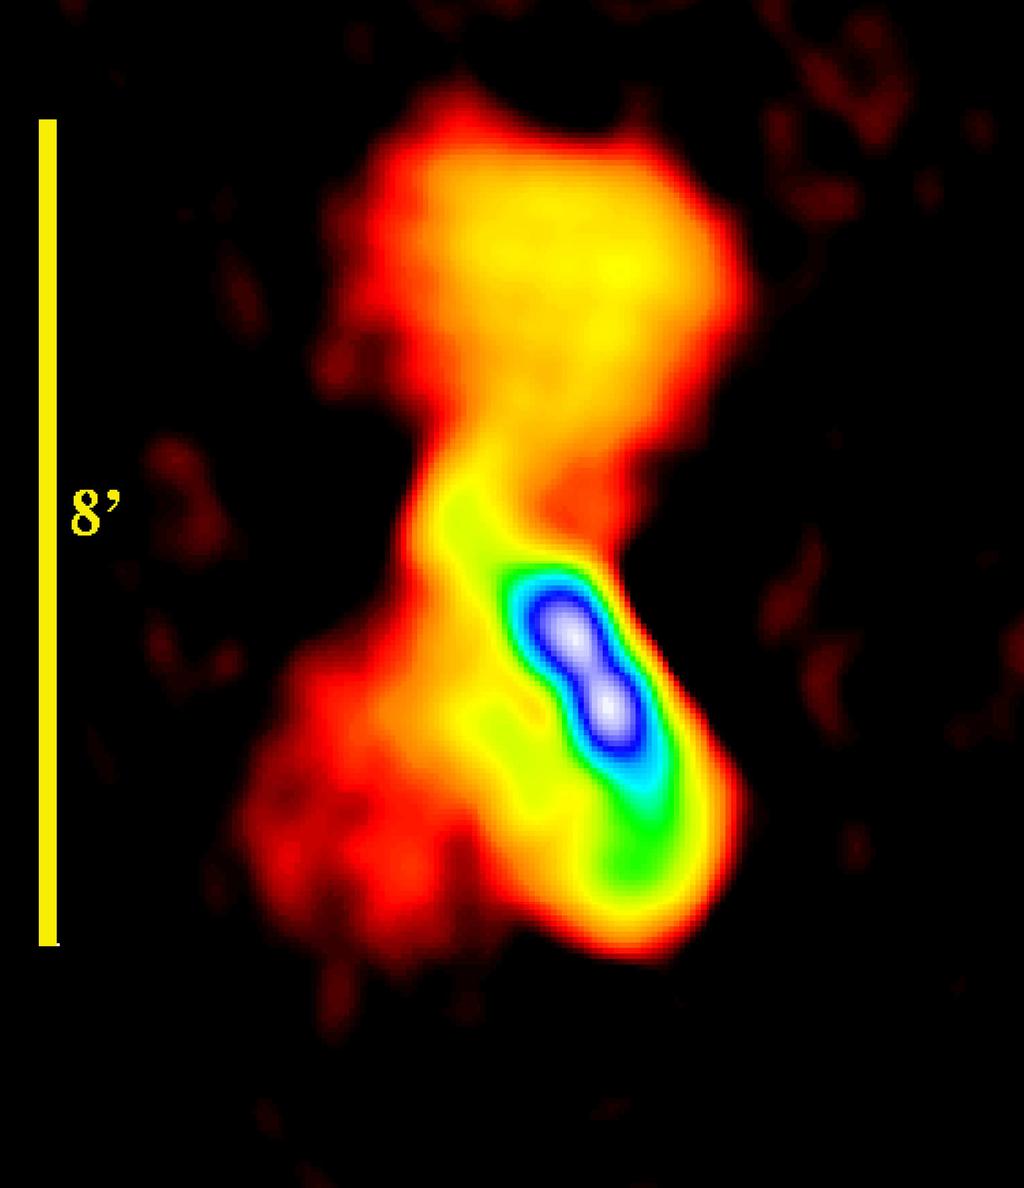 MHz VLA radio (color) image of the field containing 3C129 (large radio galaxy) and 3C129.1 (small diameter source near the peak of the X-ray emission).